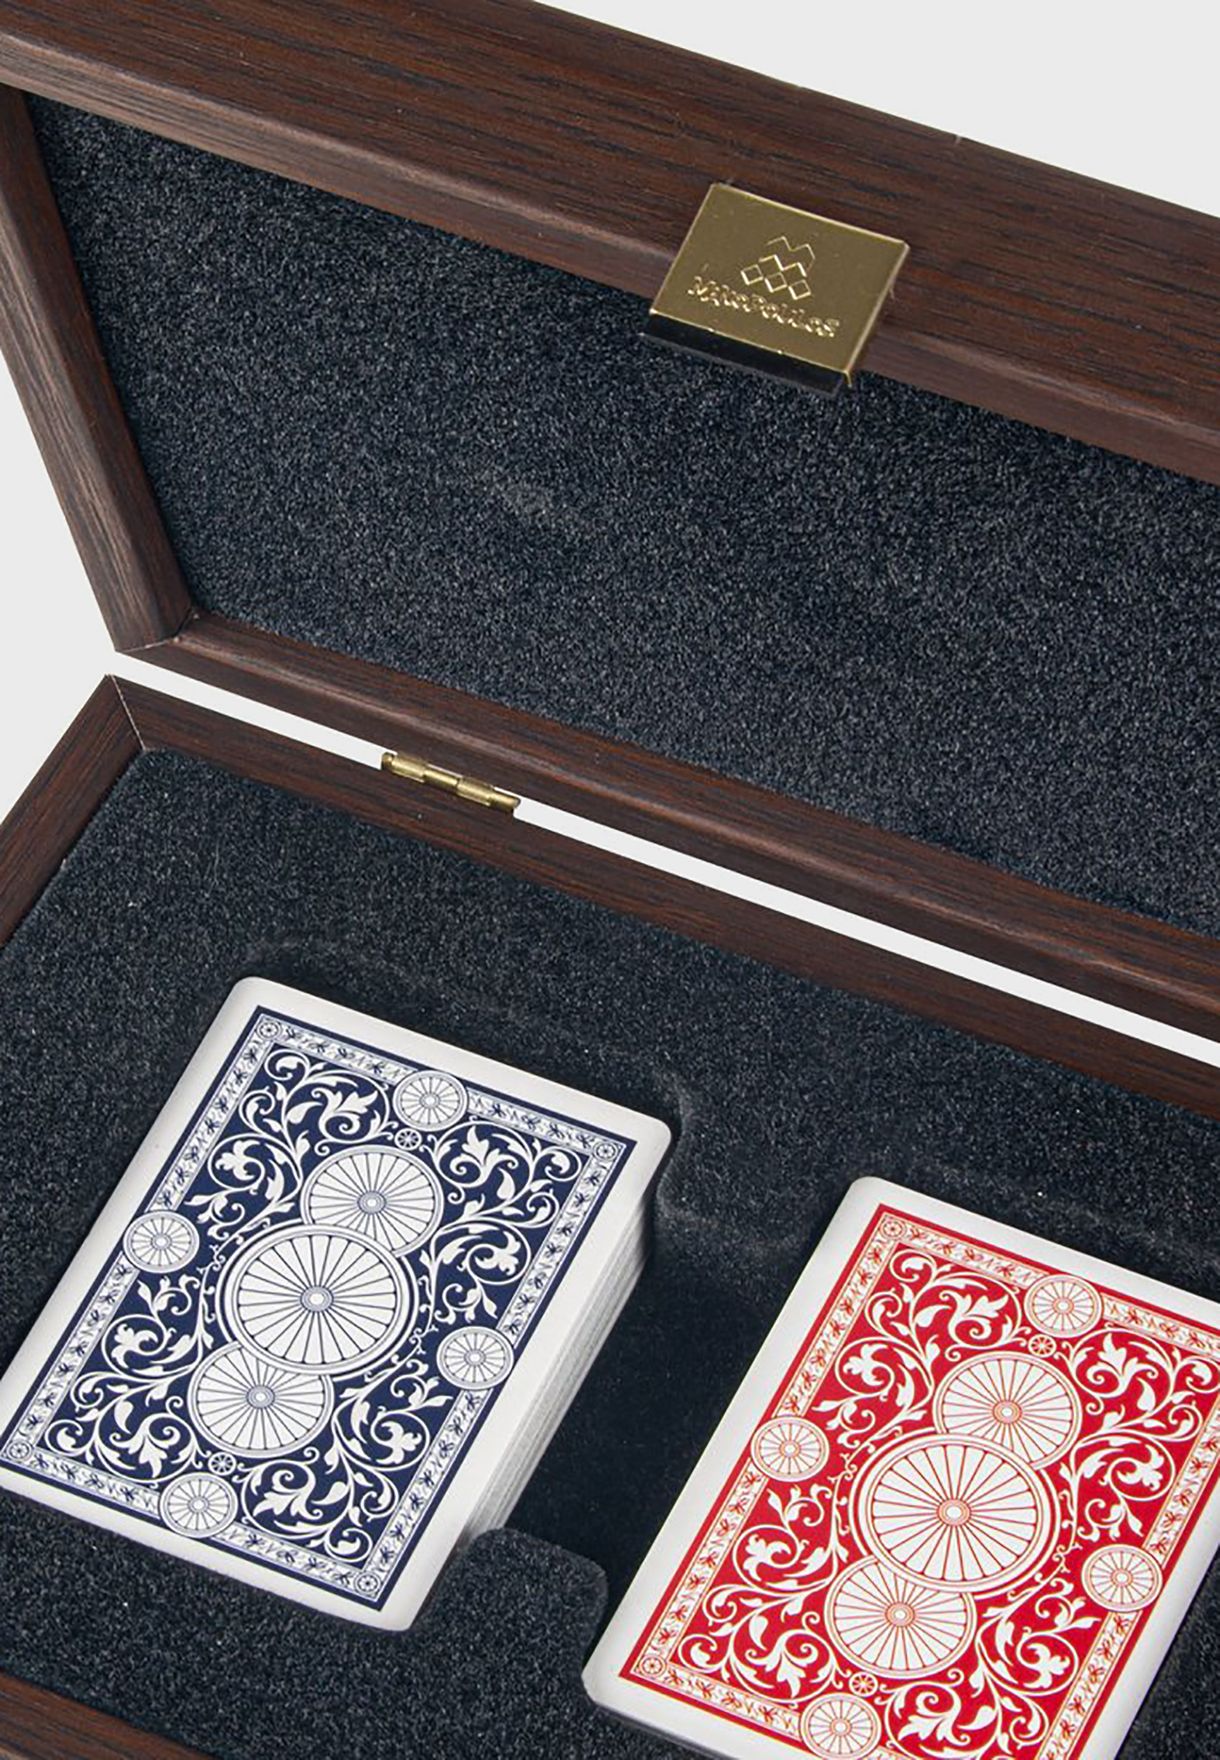 Playing Cards In Wooden Case